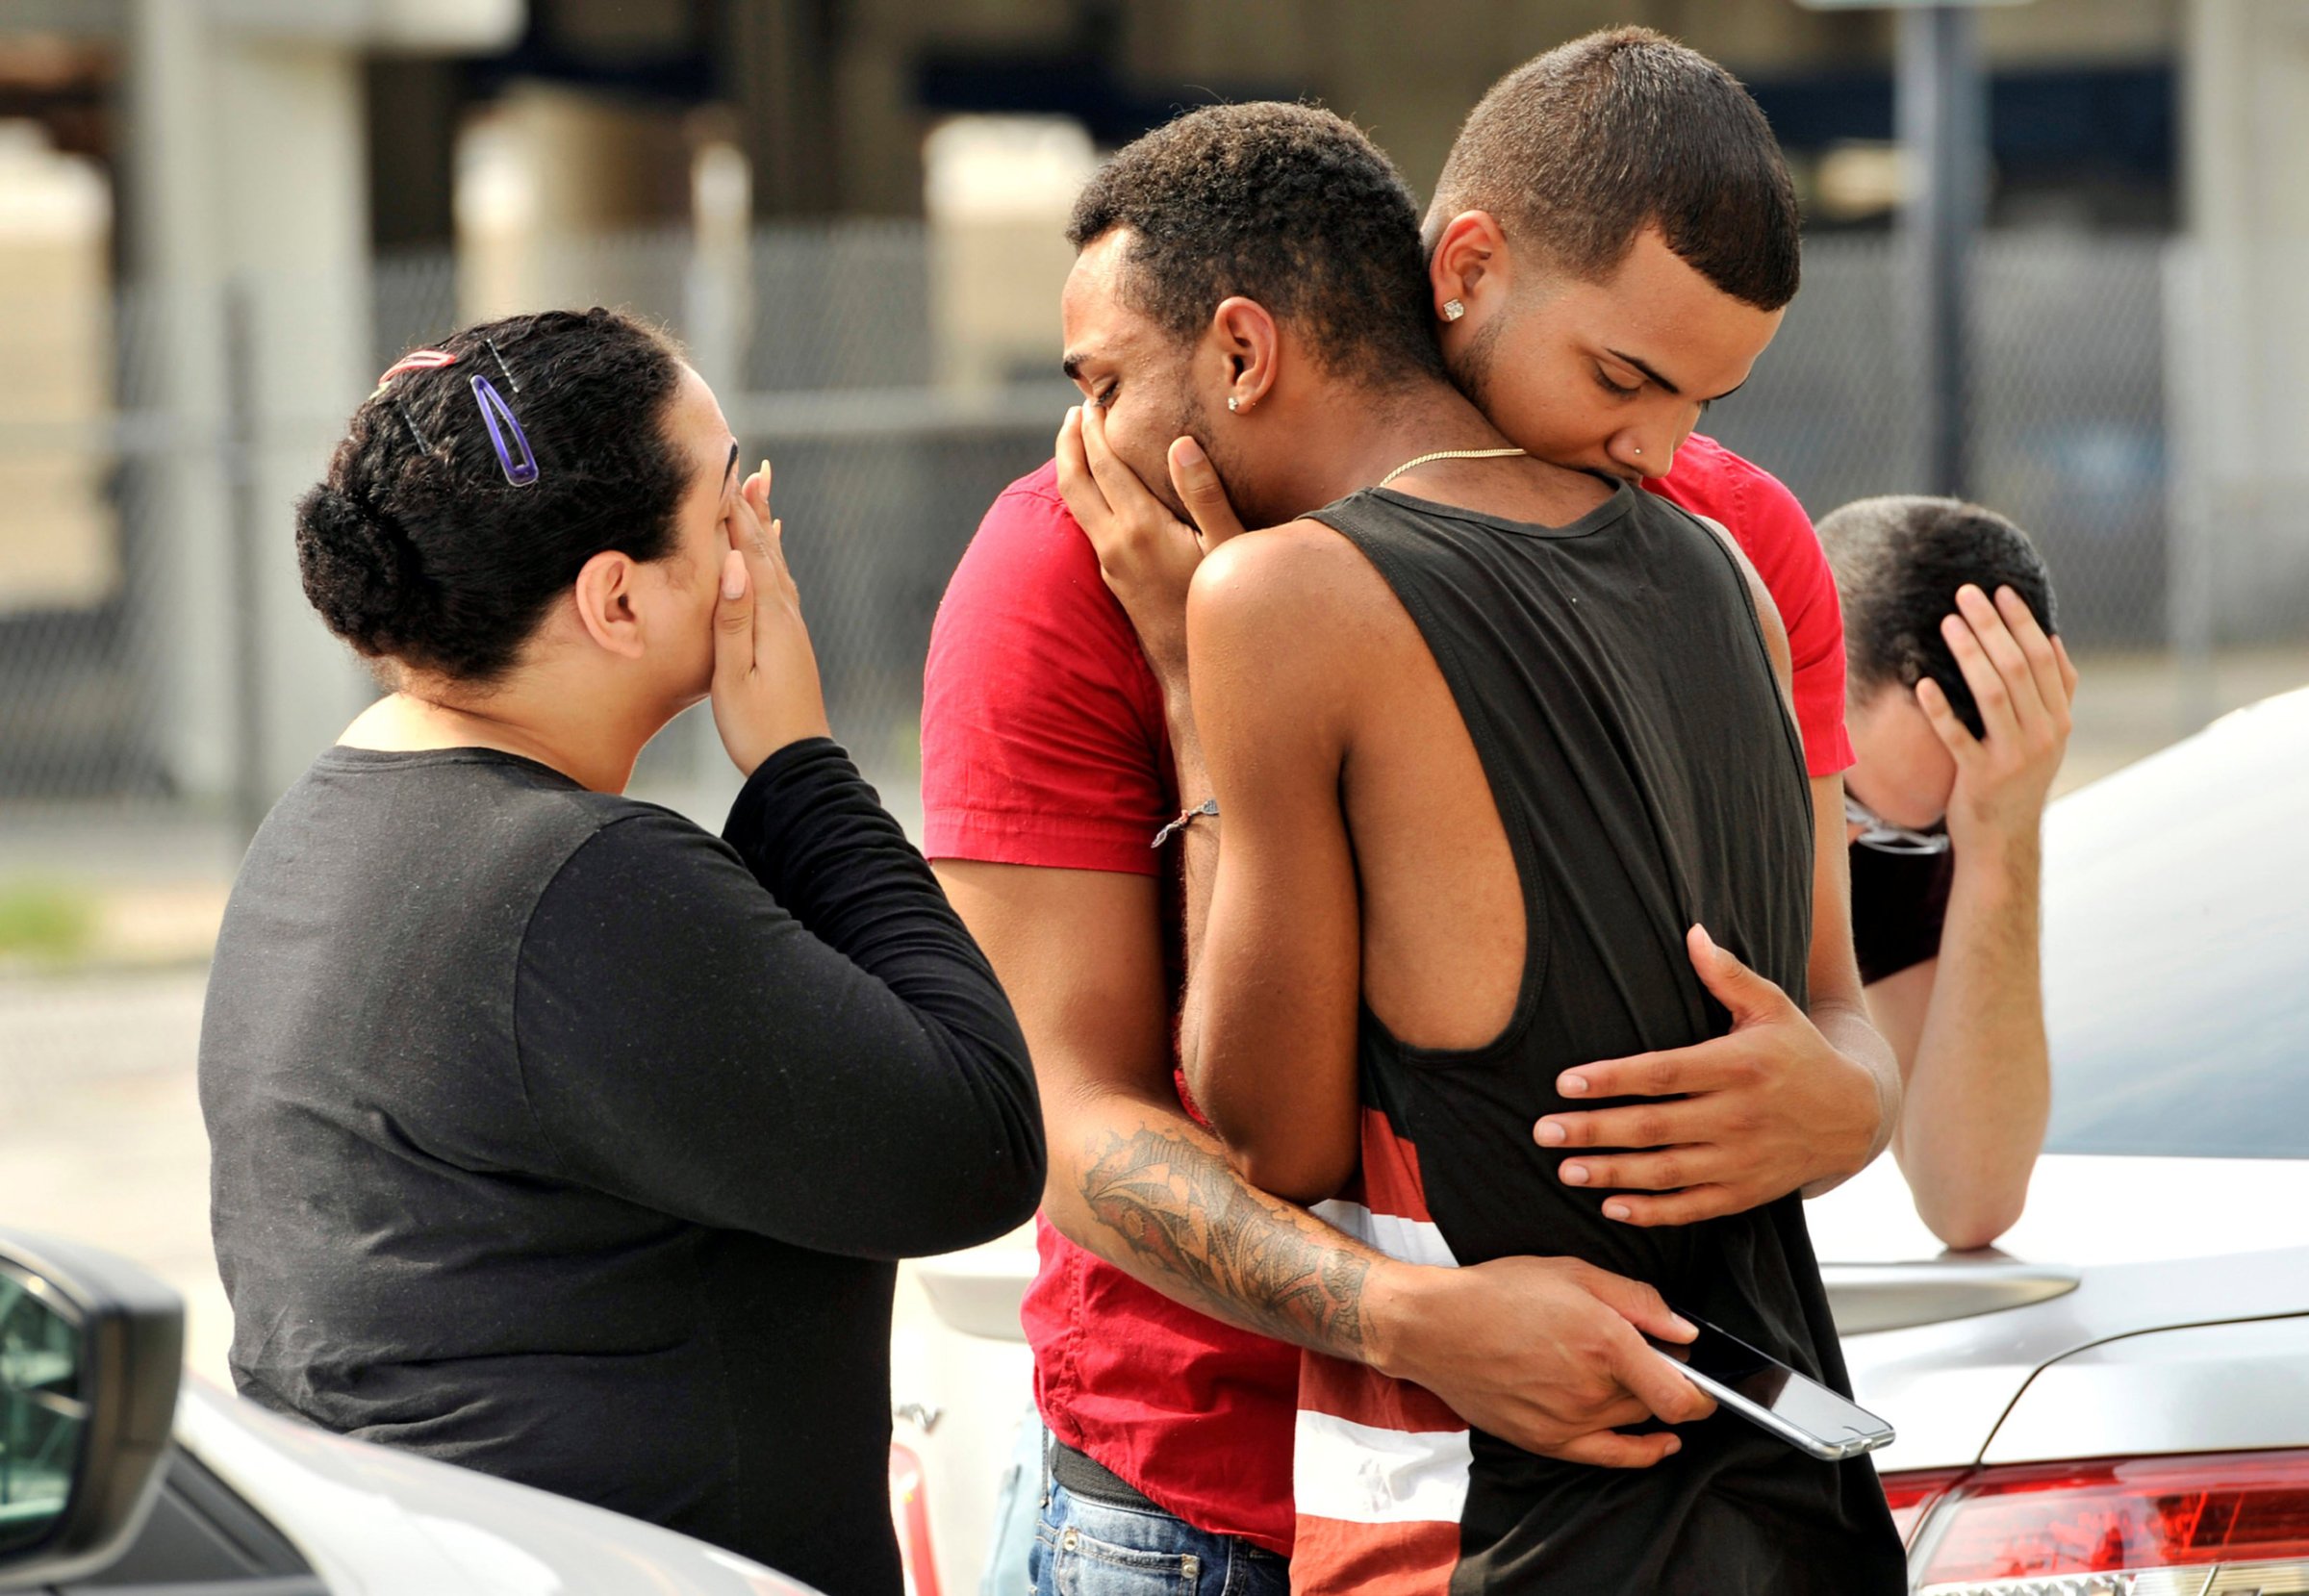 Friends and family members embrace outside the Orlando Police Headquarters during the investigation of a shooting at the Pulse nightclub in Orlando, Fla., on June 13, 2016.